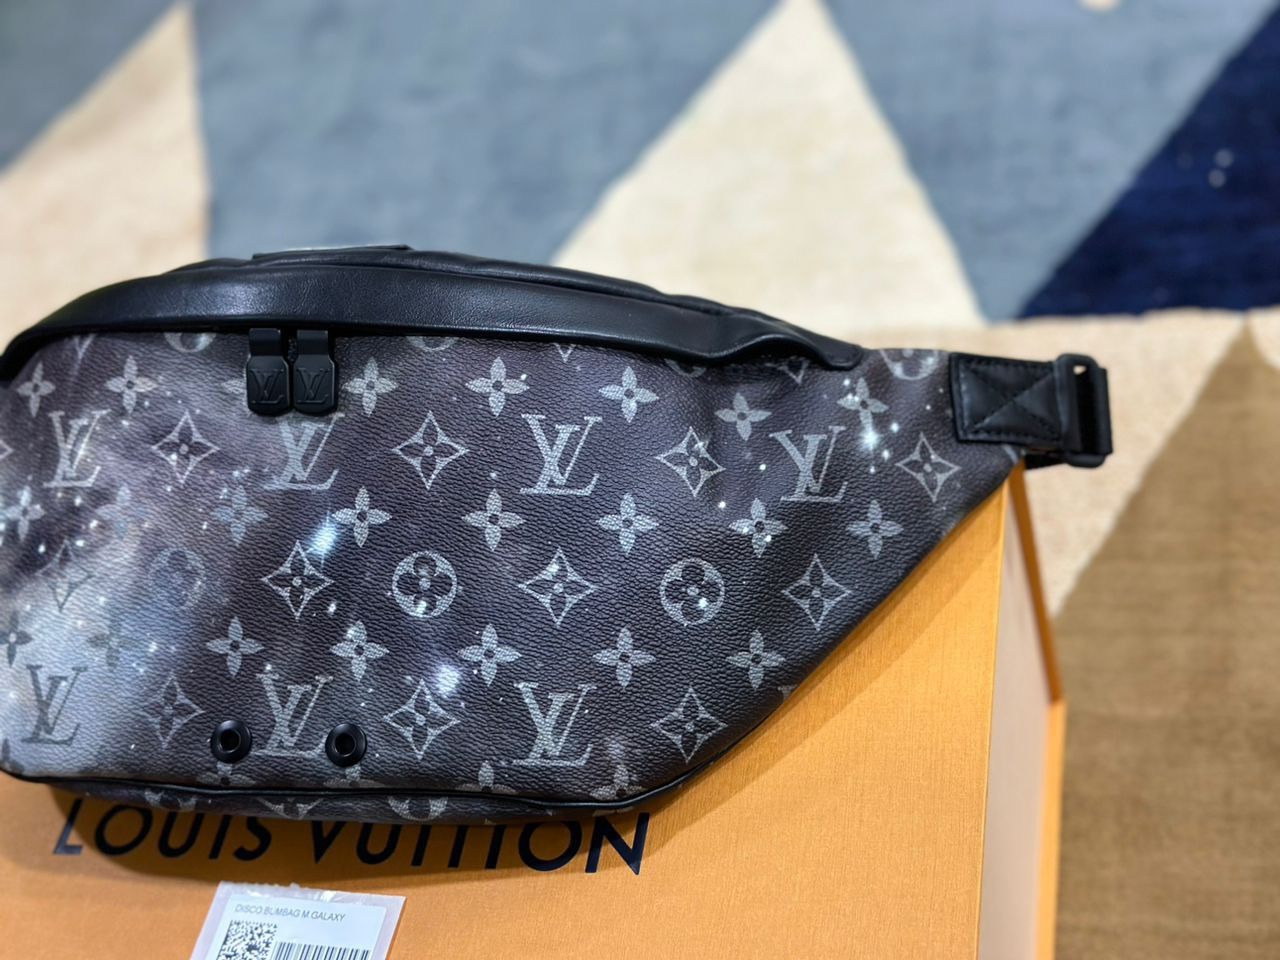 Organizers For Louis Vuitton Discovery Bumbag